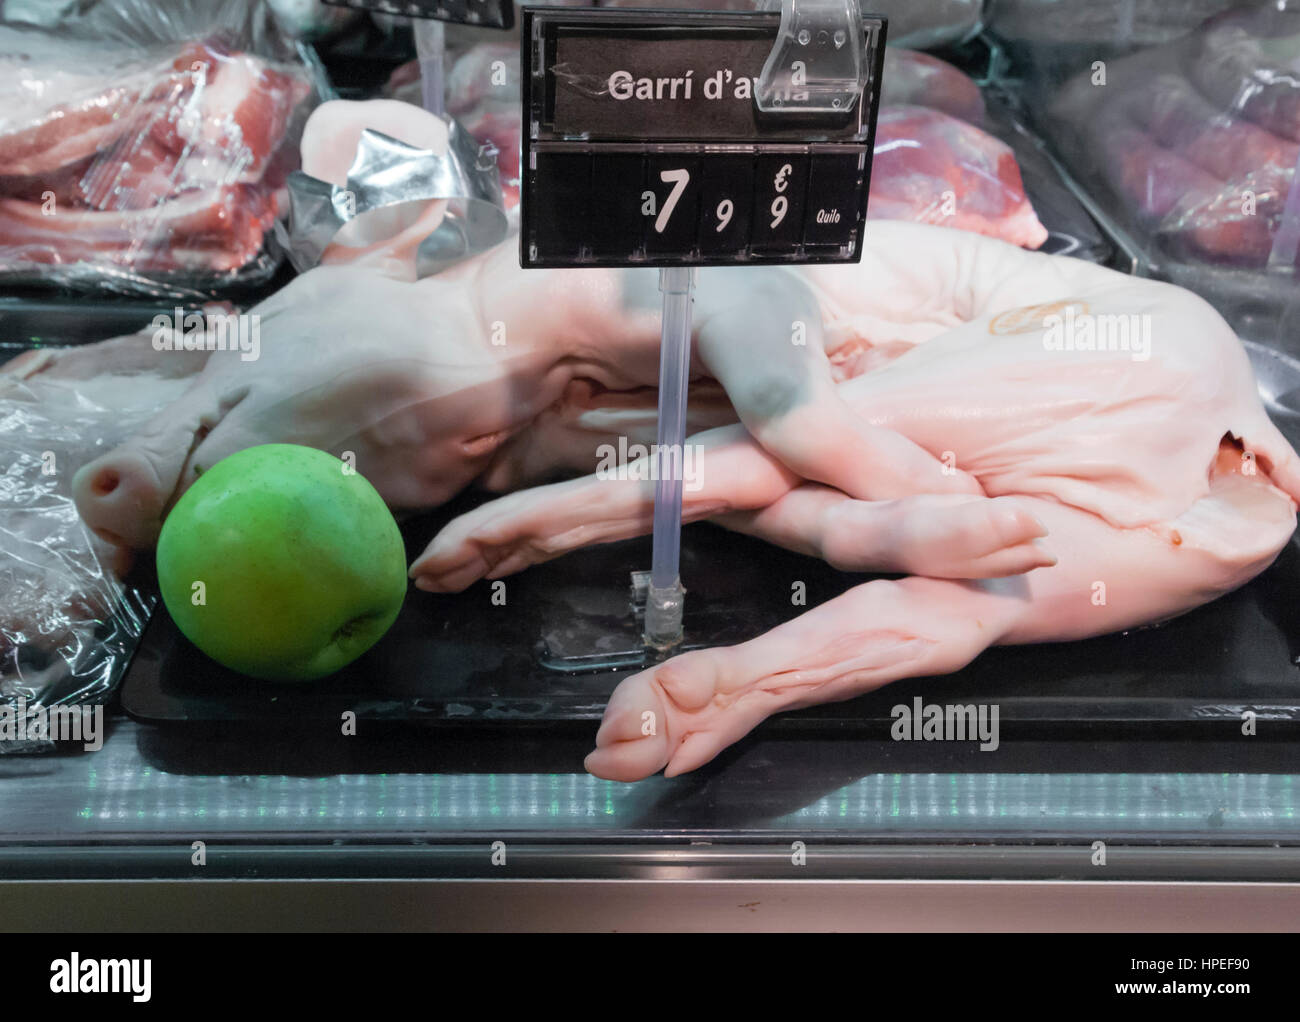 A whole piglet displayed for sale in a refrigerator in a supermarket in Barcelona, Spain. Stock Photo